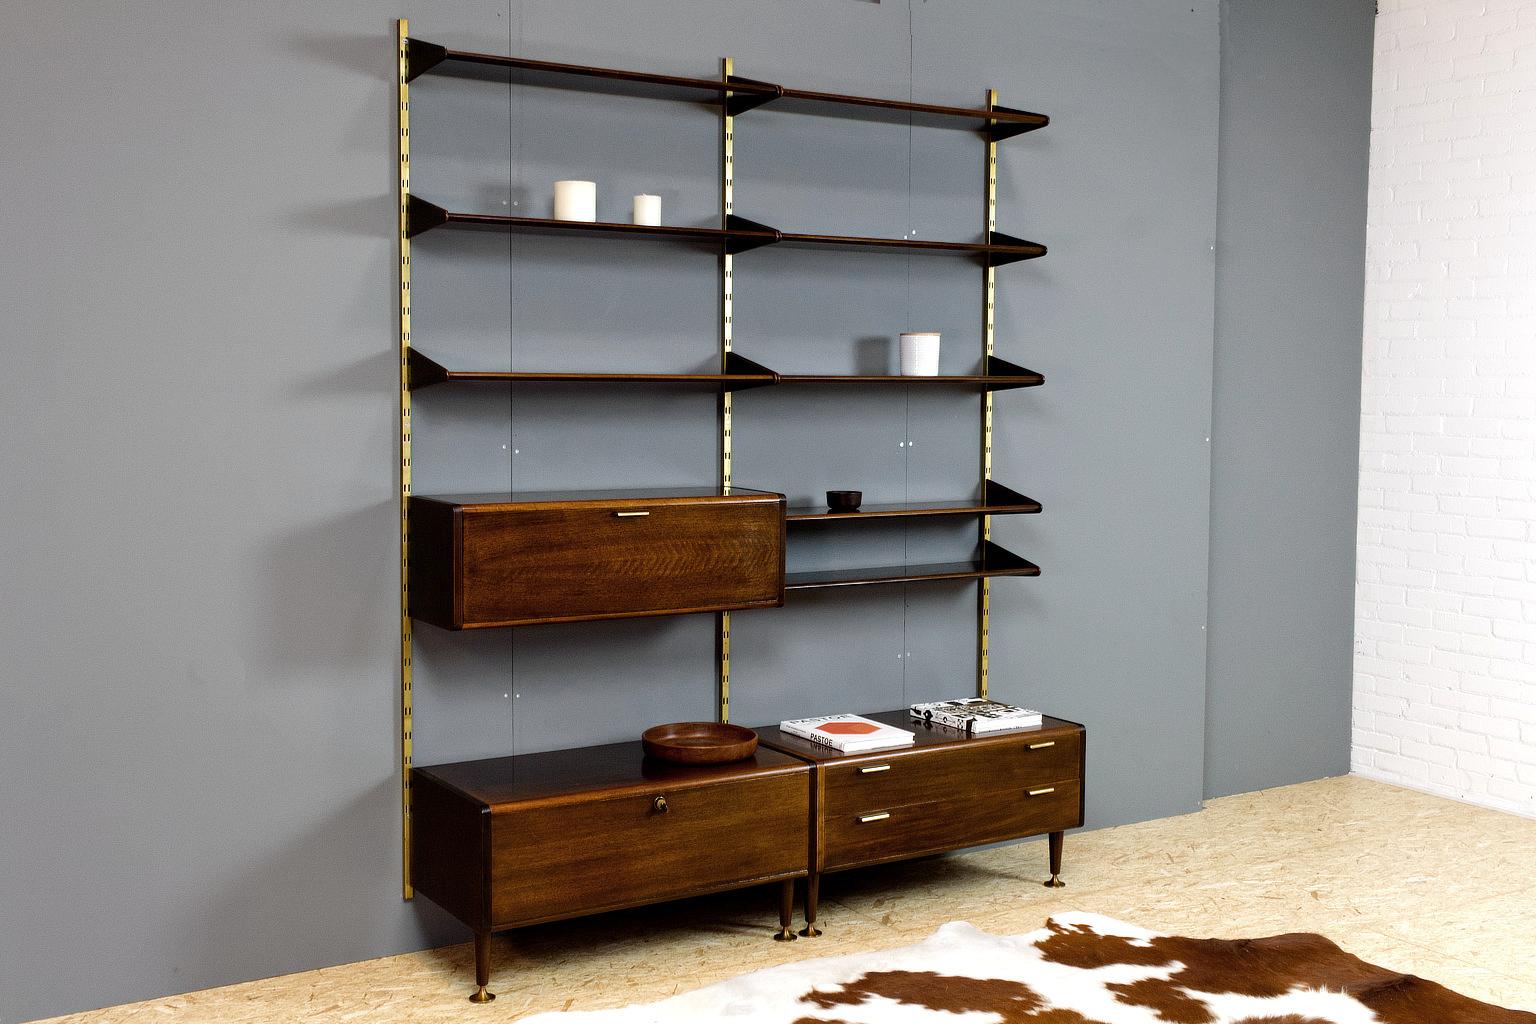 Original modular wall unit executed in polished ash with brass details and uprights, designed by Abraham Patijn during the early 1950s. The trumpet feet, and the rounded shelves and cabinets, show the great craftsmanship of Dutch Mid-Century Modern